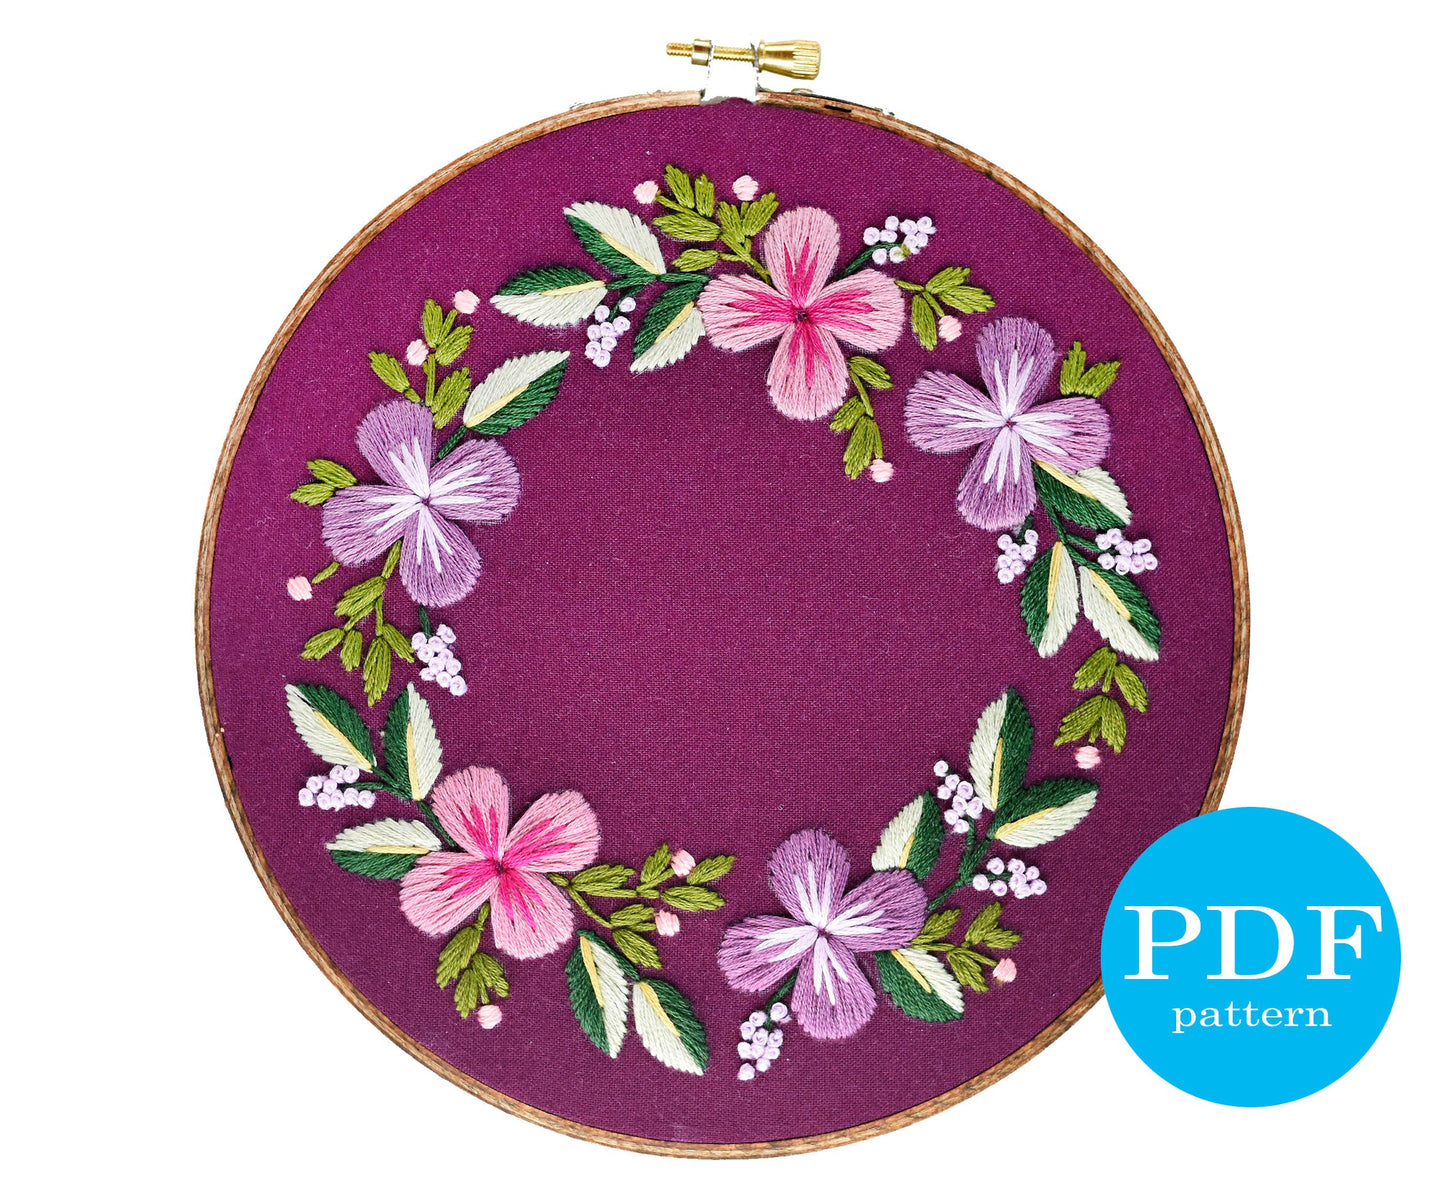 Purple Floral Wreath Embroidery Pattern. Beginner Embroidery. PDF embroidery pattern. 7" hoop. Flower Embroidery pattern.  DIY embroidery